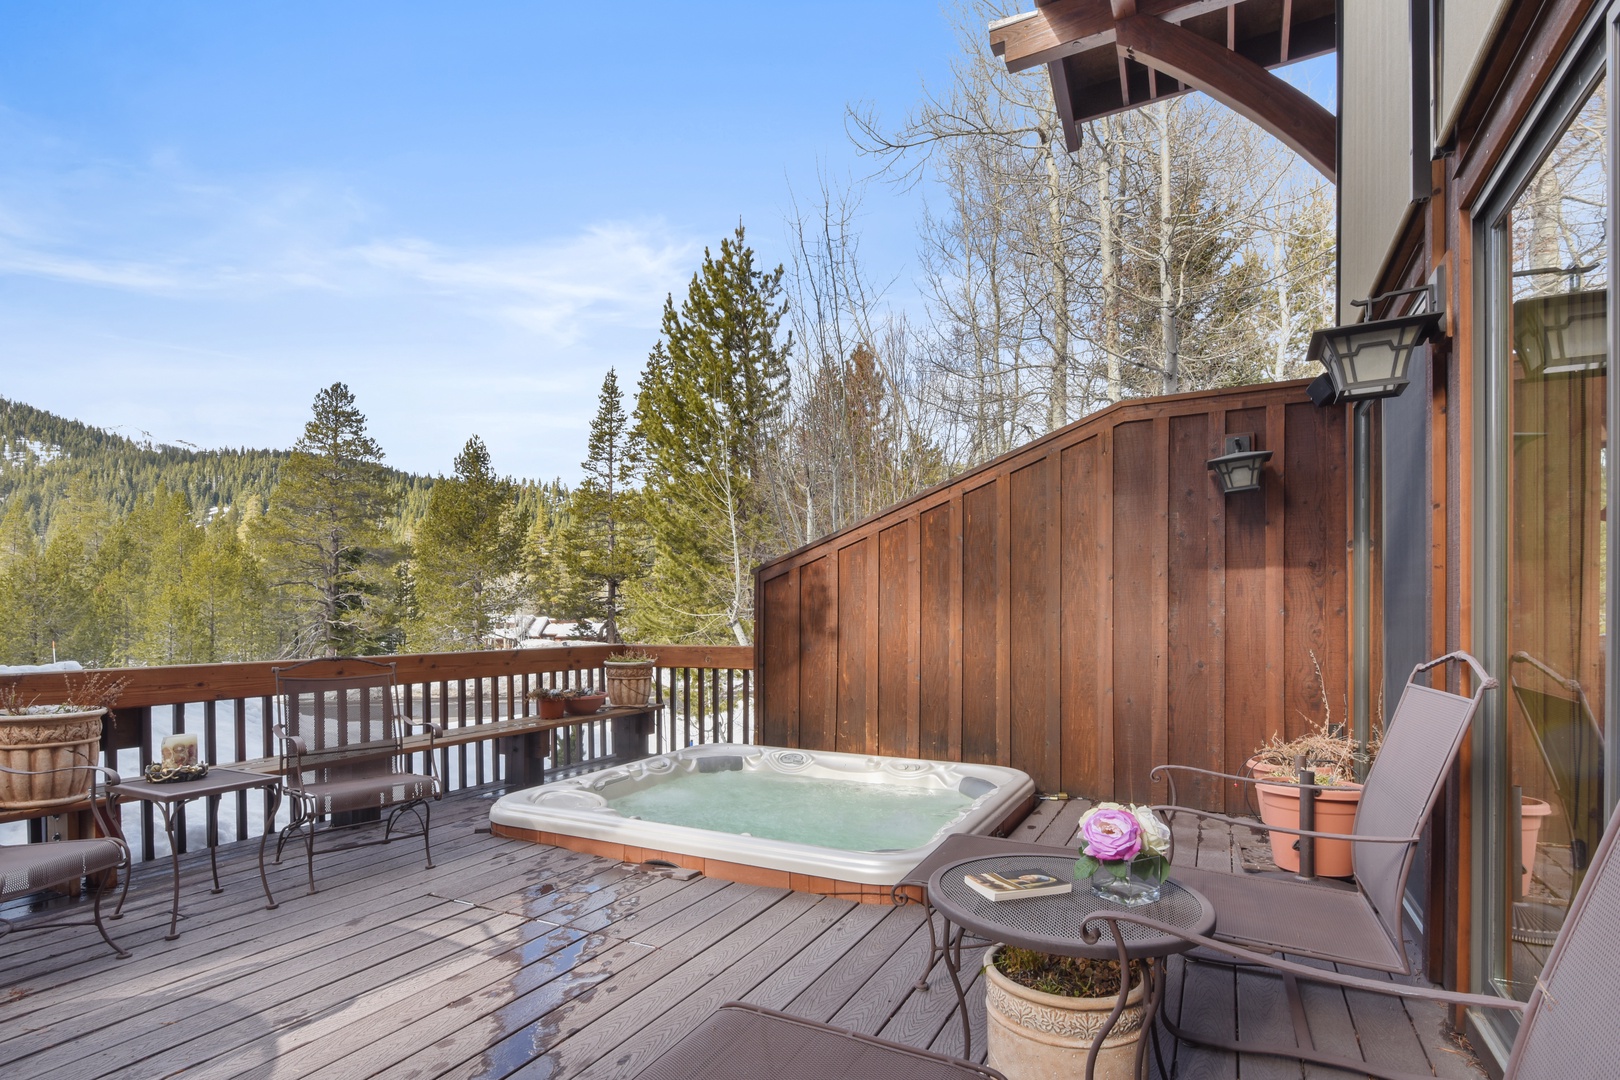 Deck w/ hot tub, seating, and gas BBQ grill